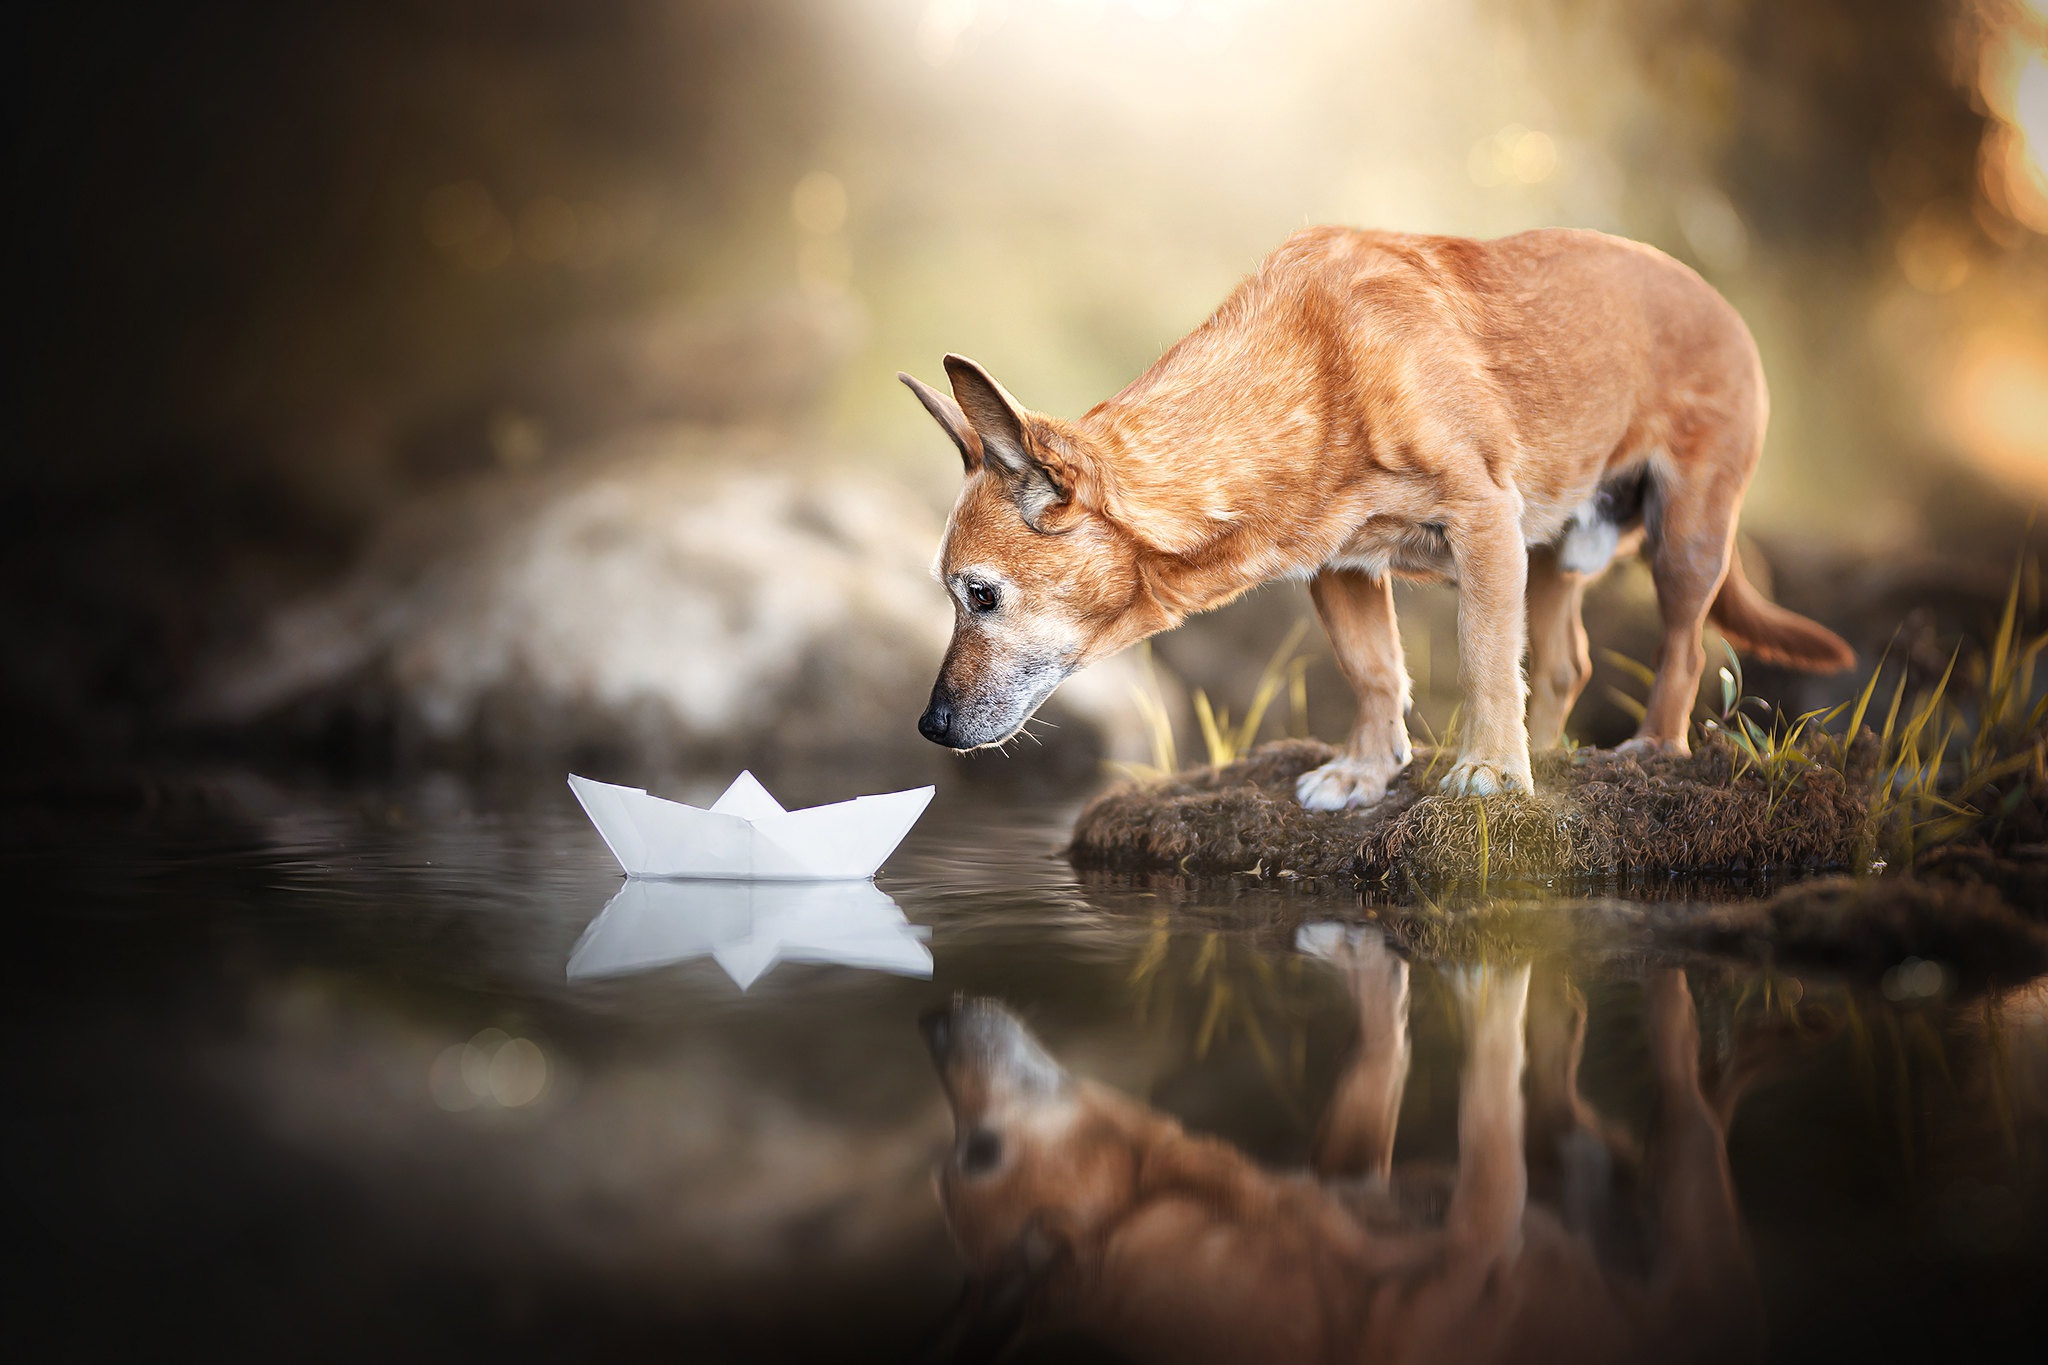 Water Reflection Dog Baby Animal Paper Boat 2048x1365